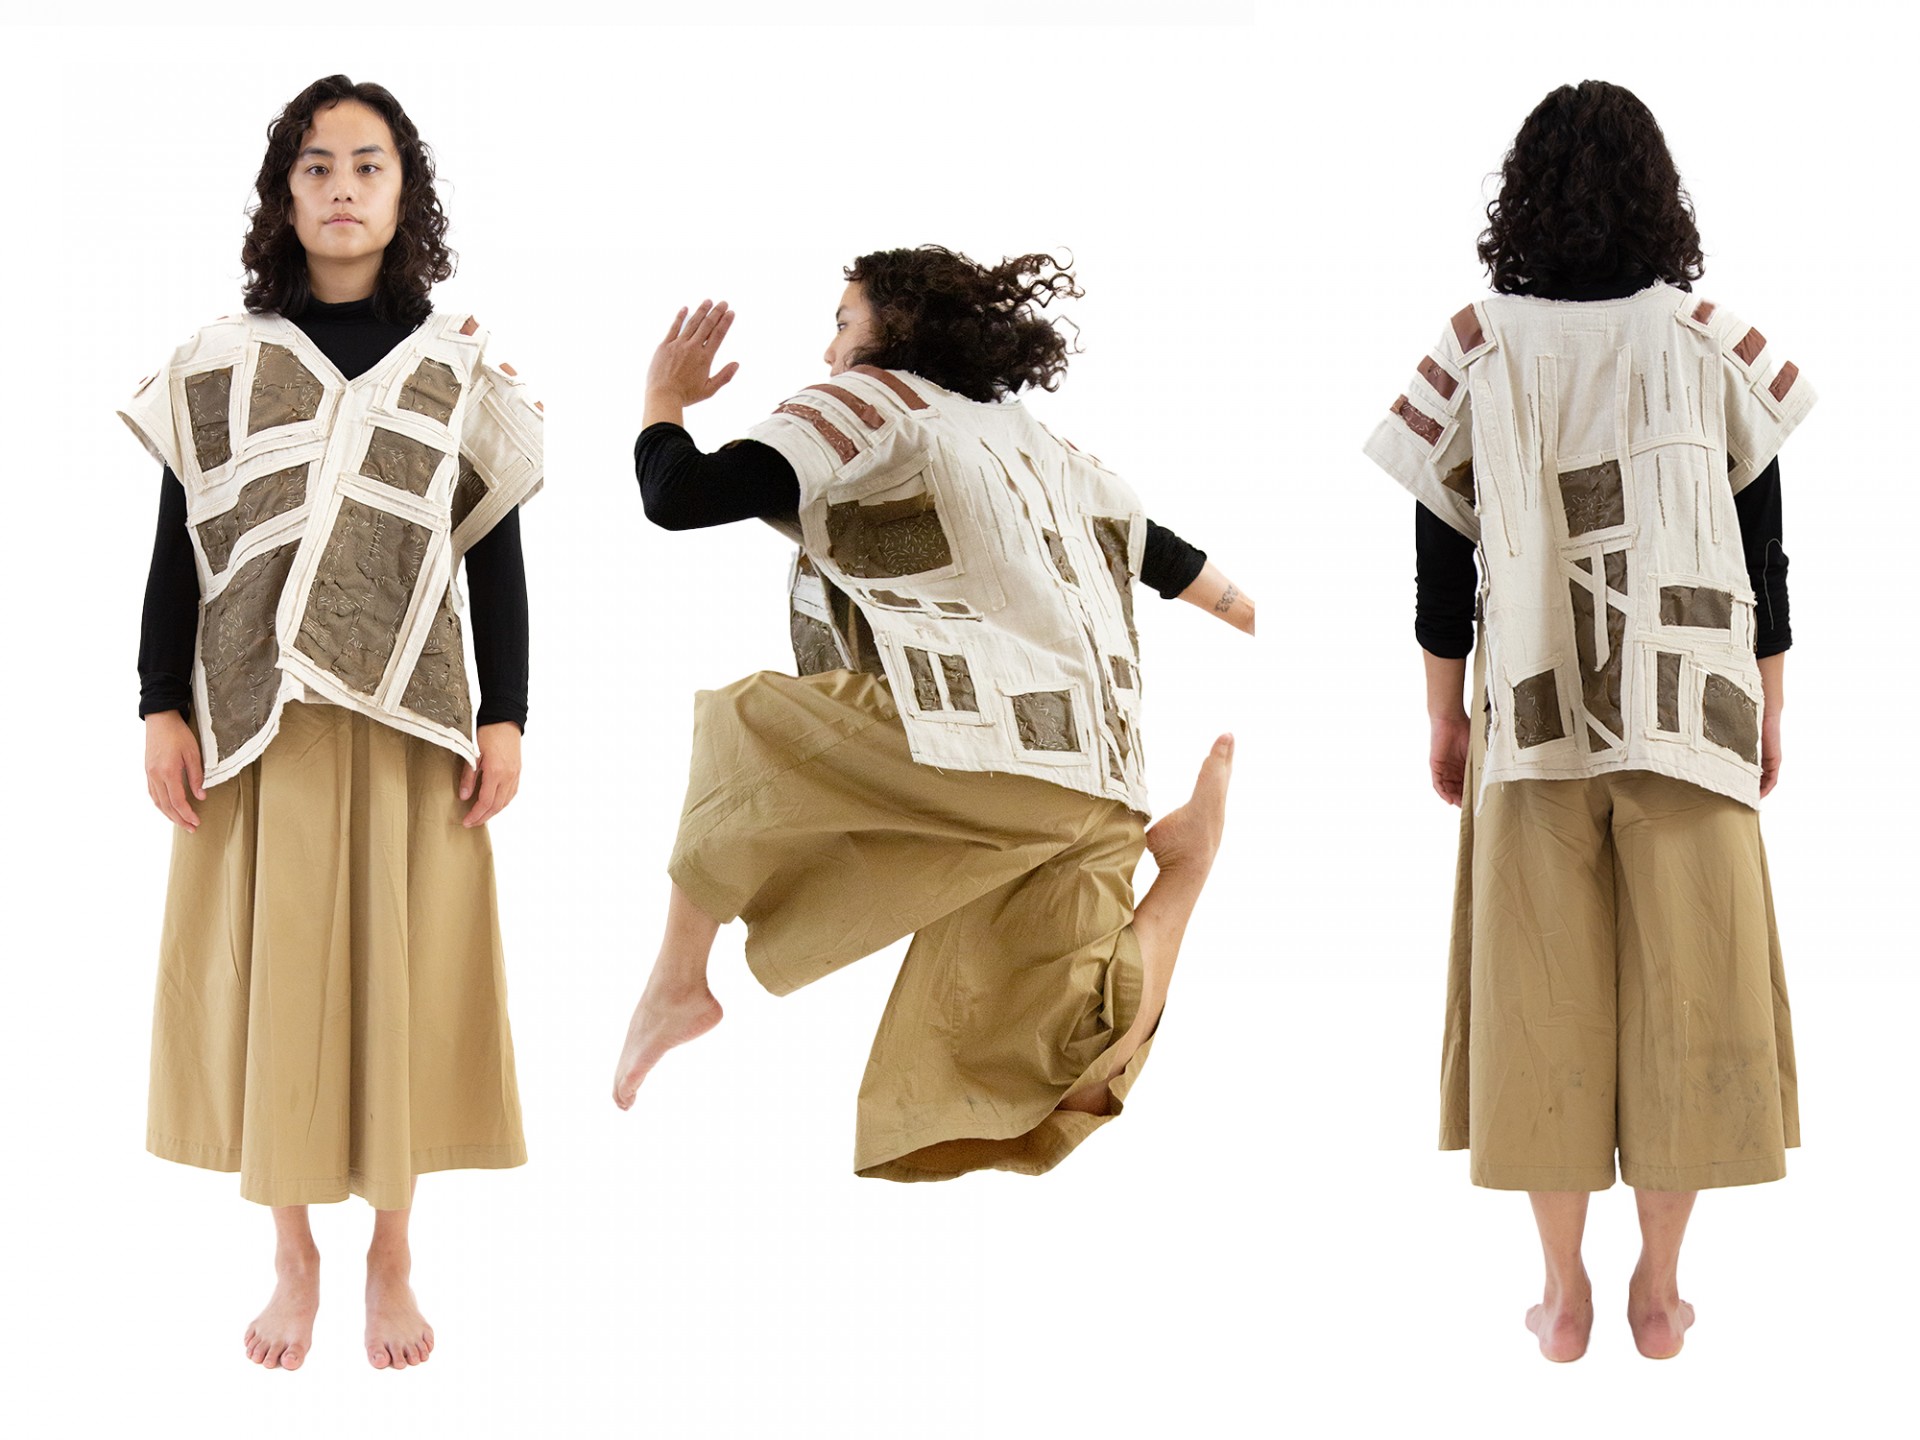 Kimono made with bioearth fabric, seen from multiple angles and in motion. Credit: Natural Materials Lab